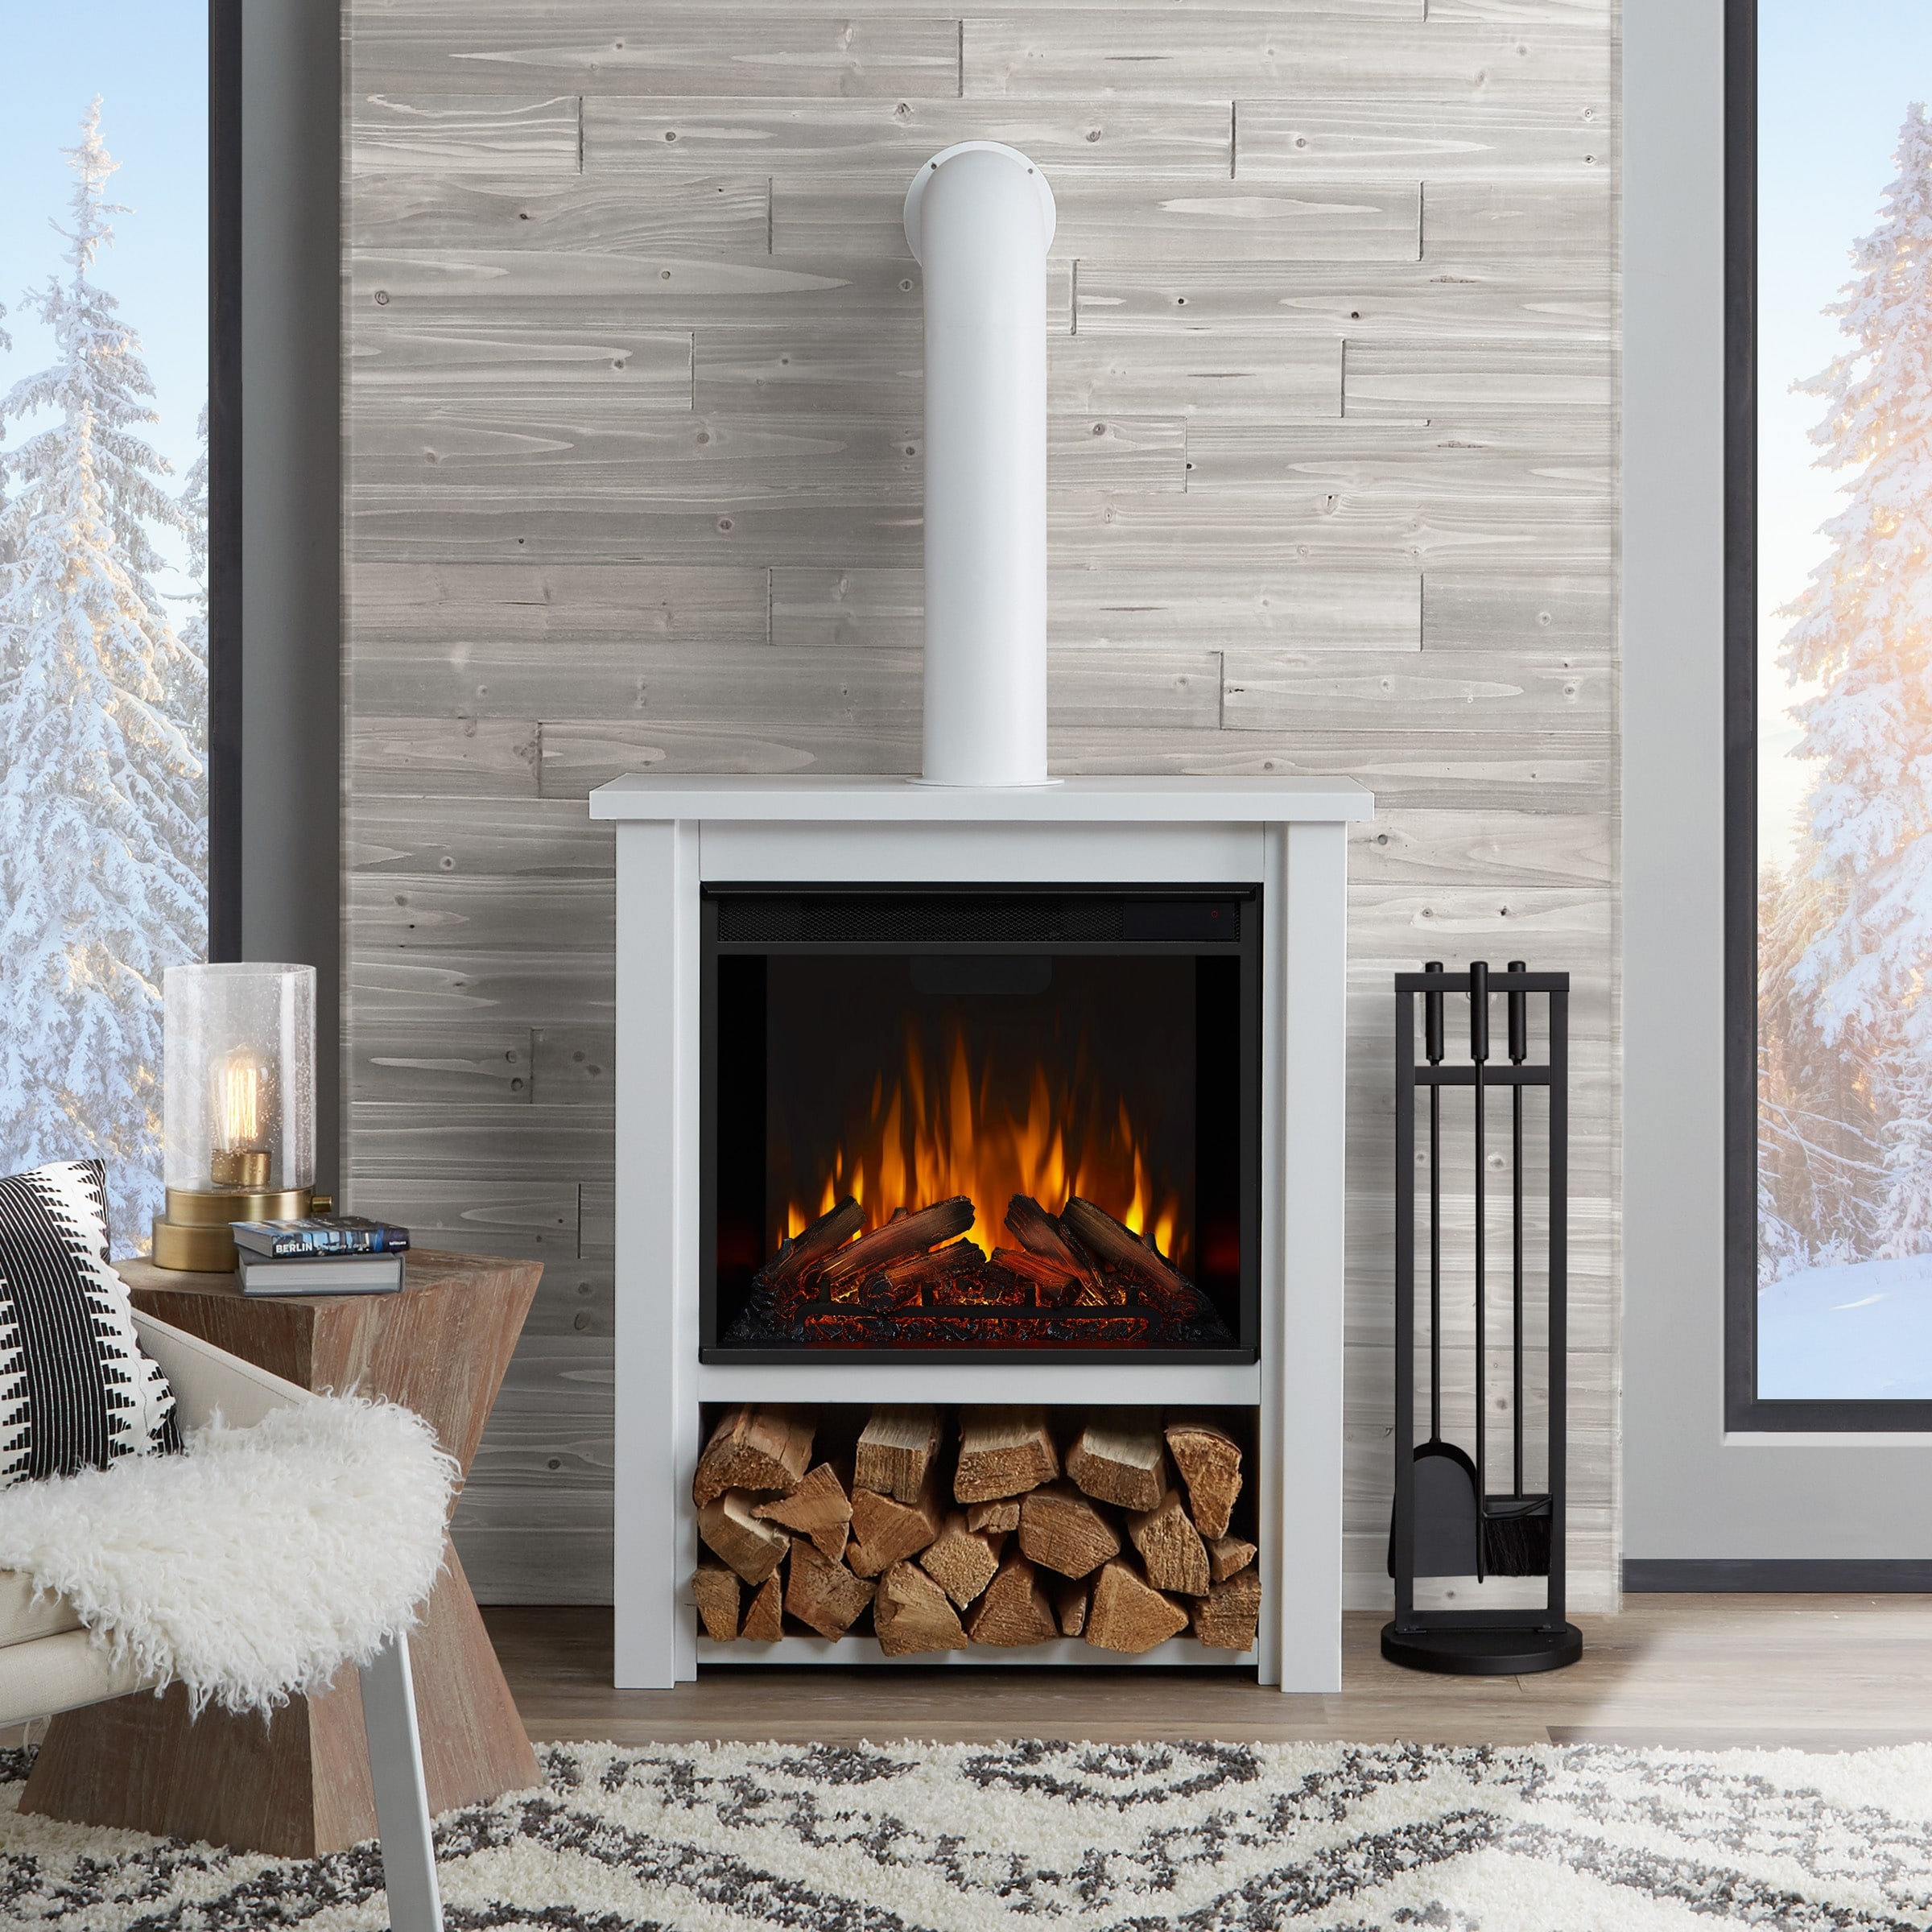 https://ak1.ostkcdn.com/images/products/is/images/direct/b2faf7aab471053ba877f1341dc97c2dfd26c5fe/Hollis-White-Retro-Wood-Stove-Style-Electric-Fireplace.jpg